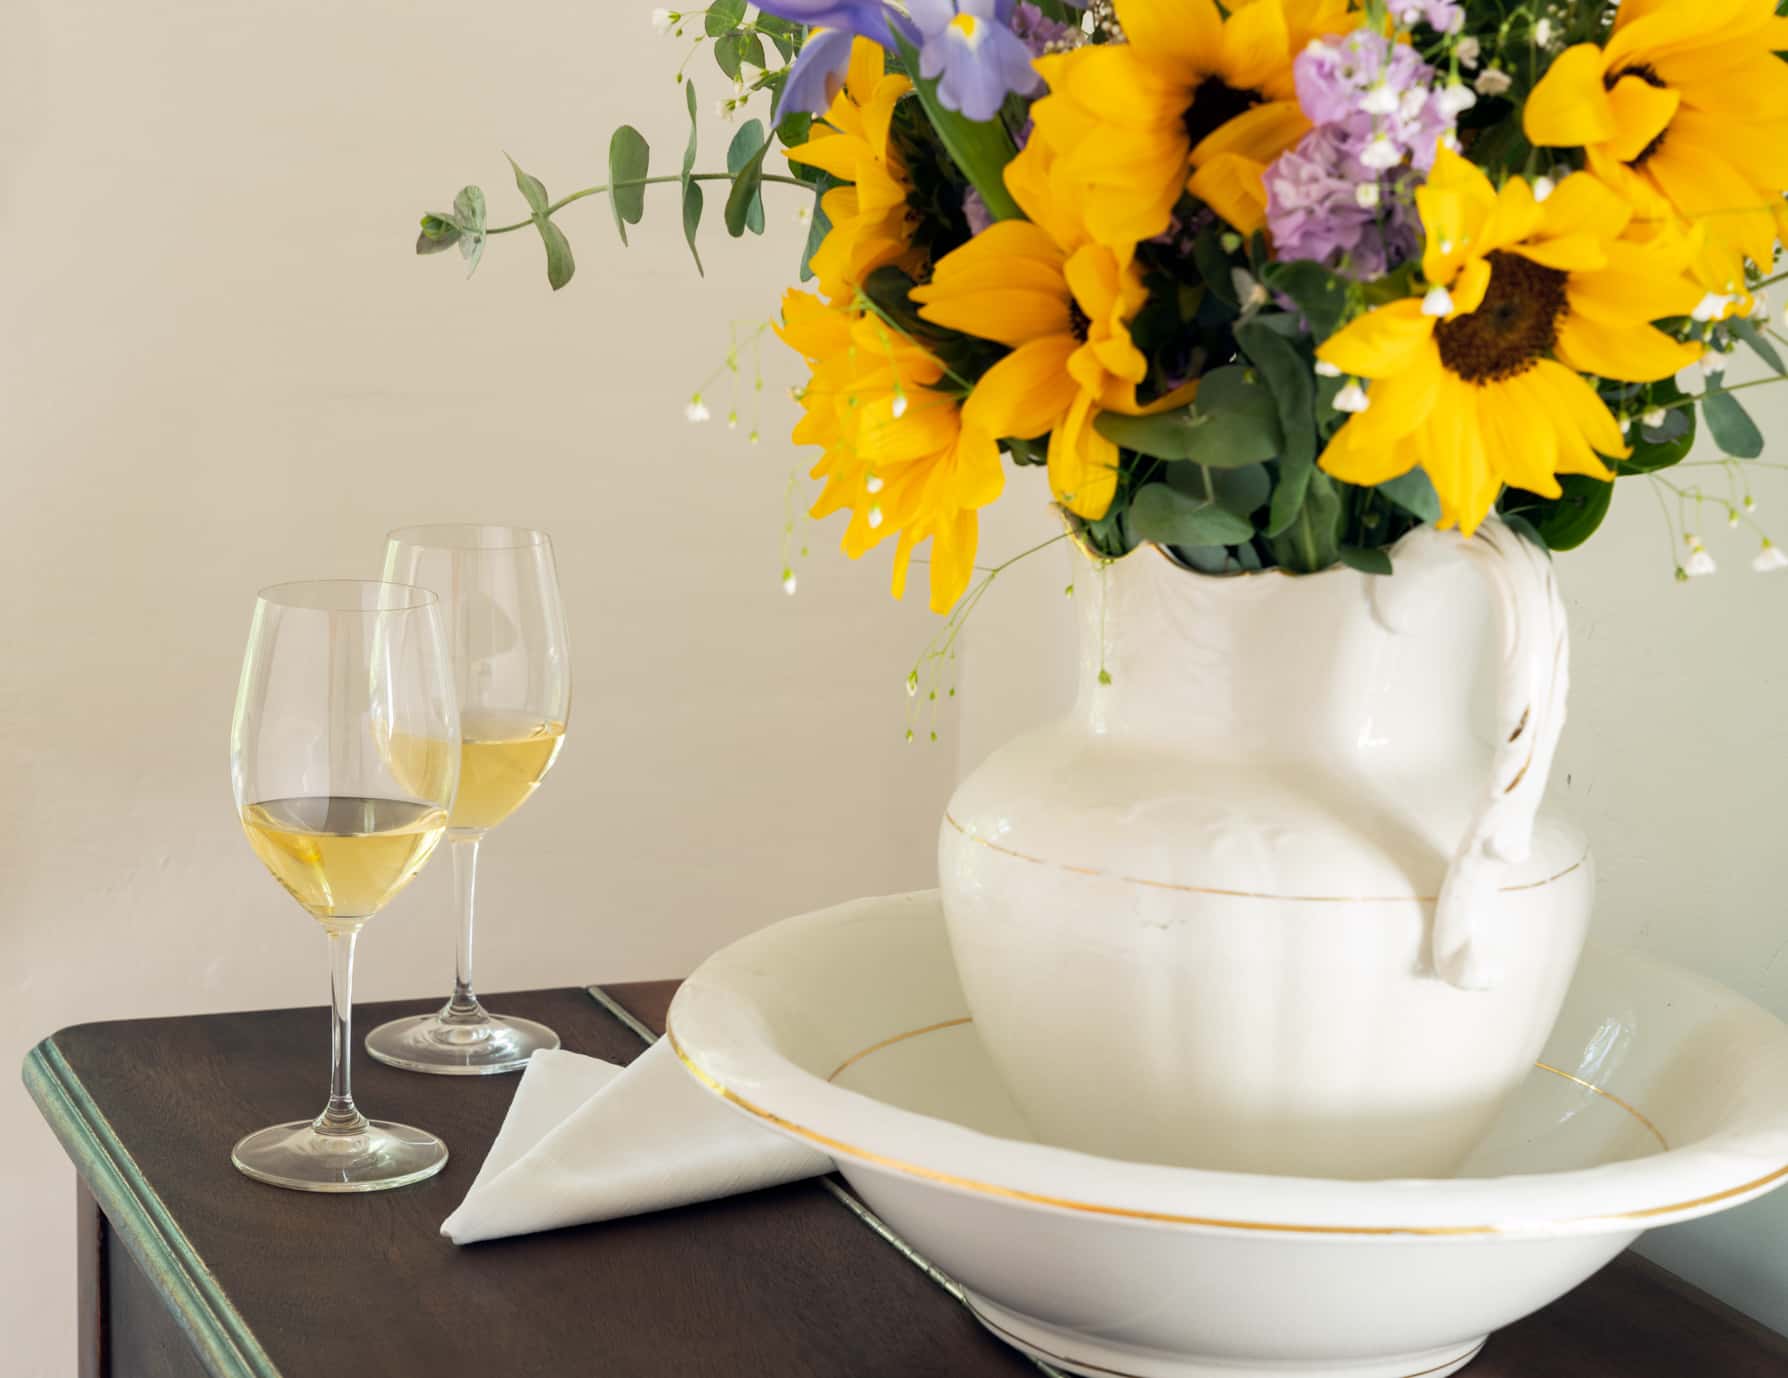 A vase of flowers and two glasses of white wine